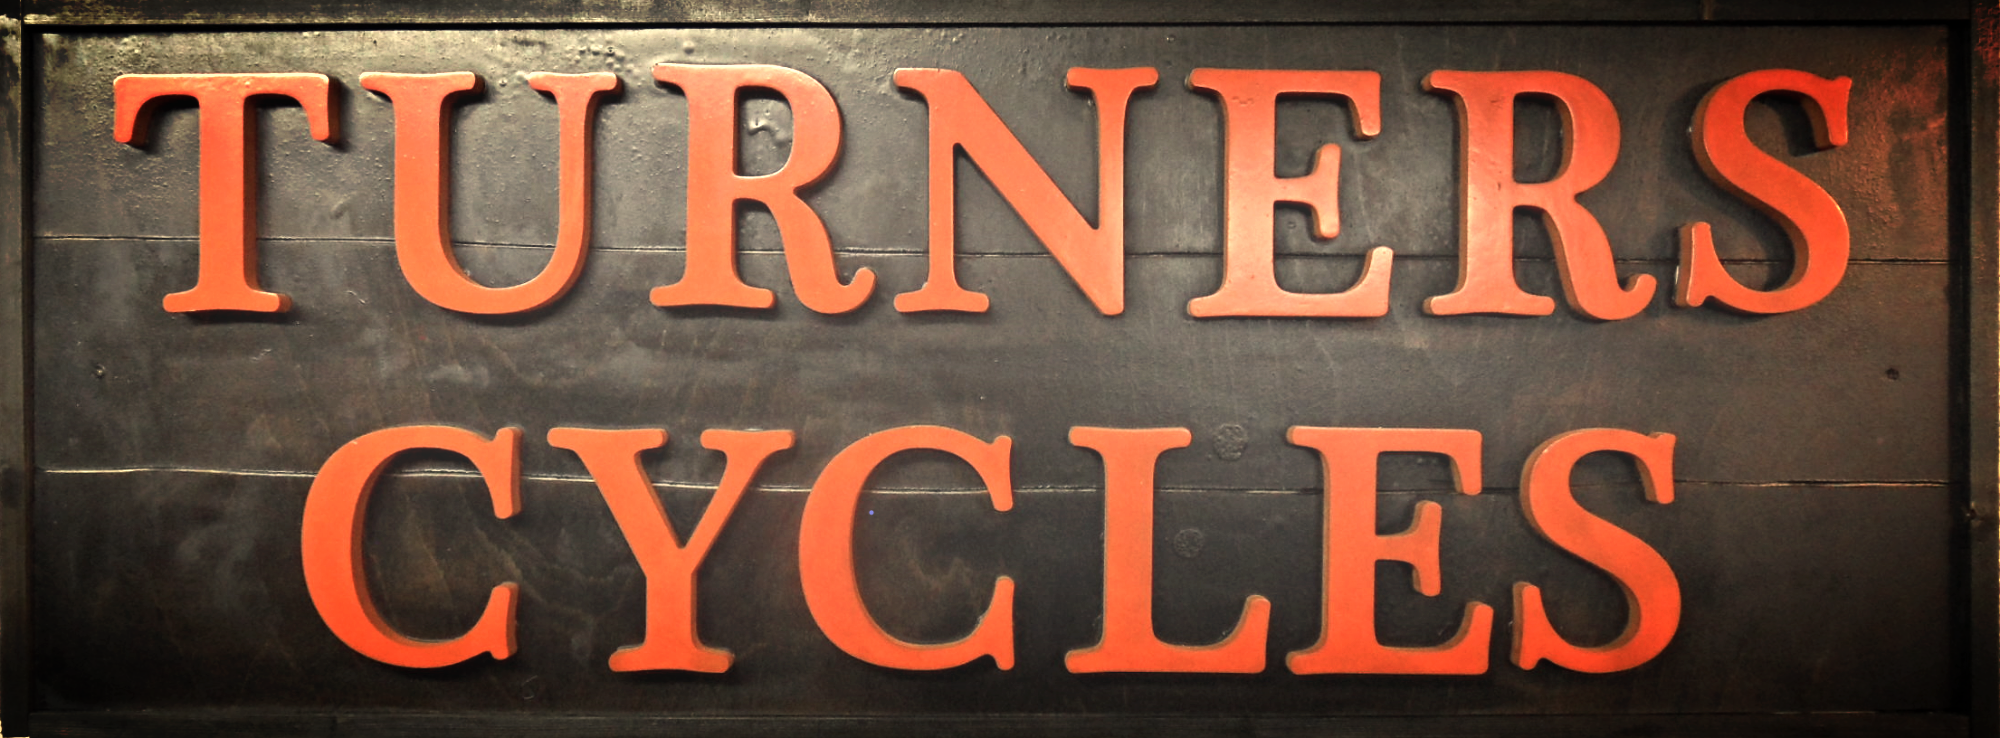 Turners Cycles - Cycling Coach - Taunton, Somerset.